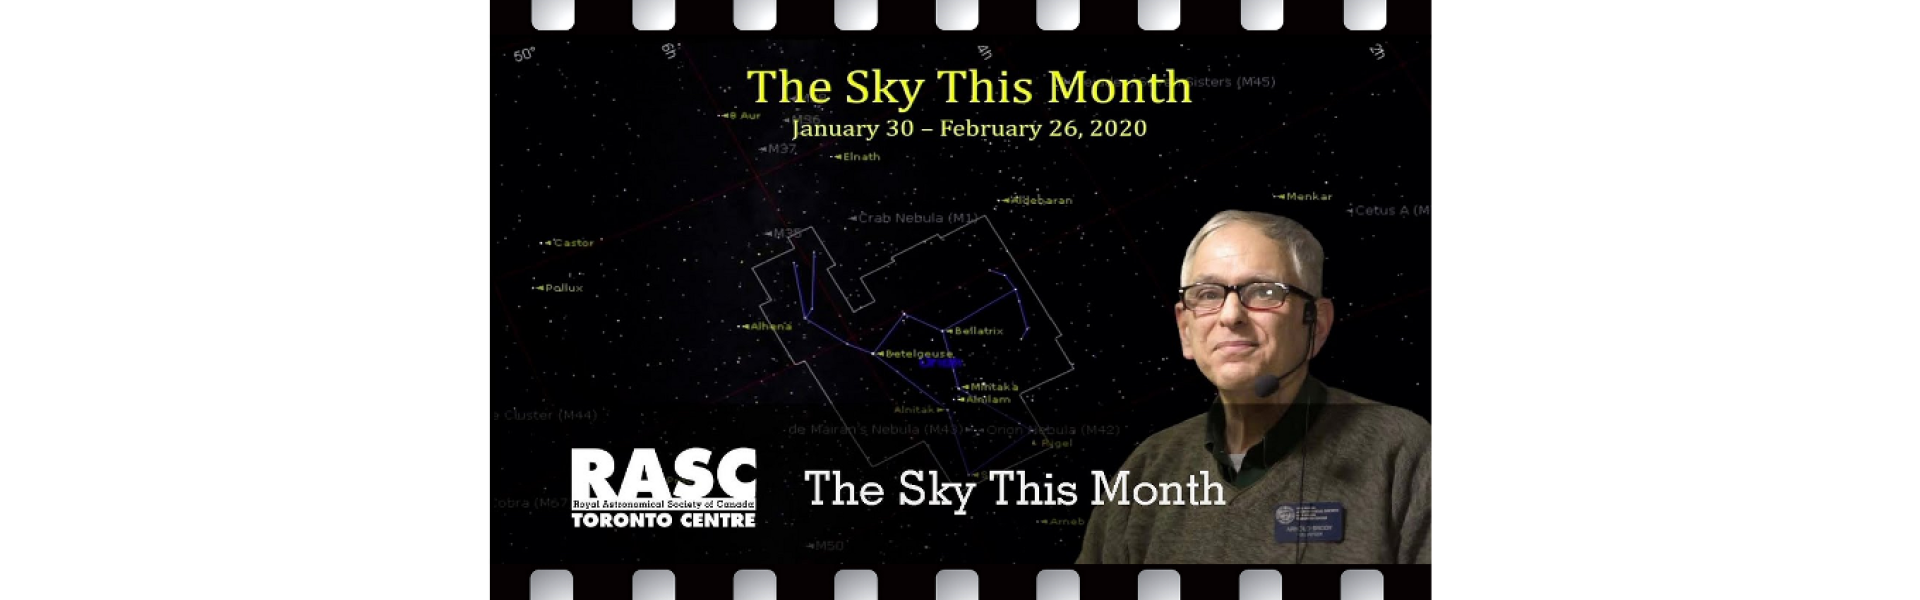 The Sky This Month January 30 - February 26, 2020